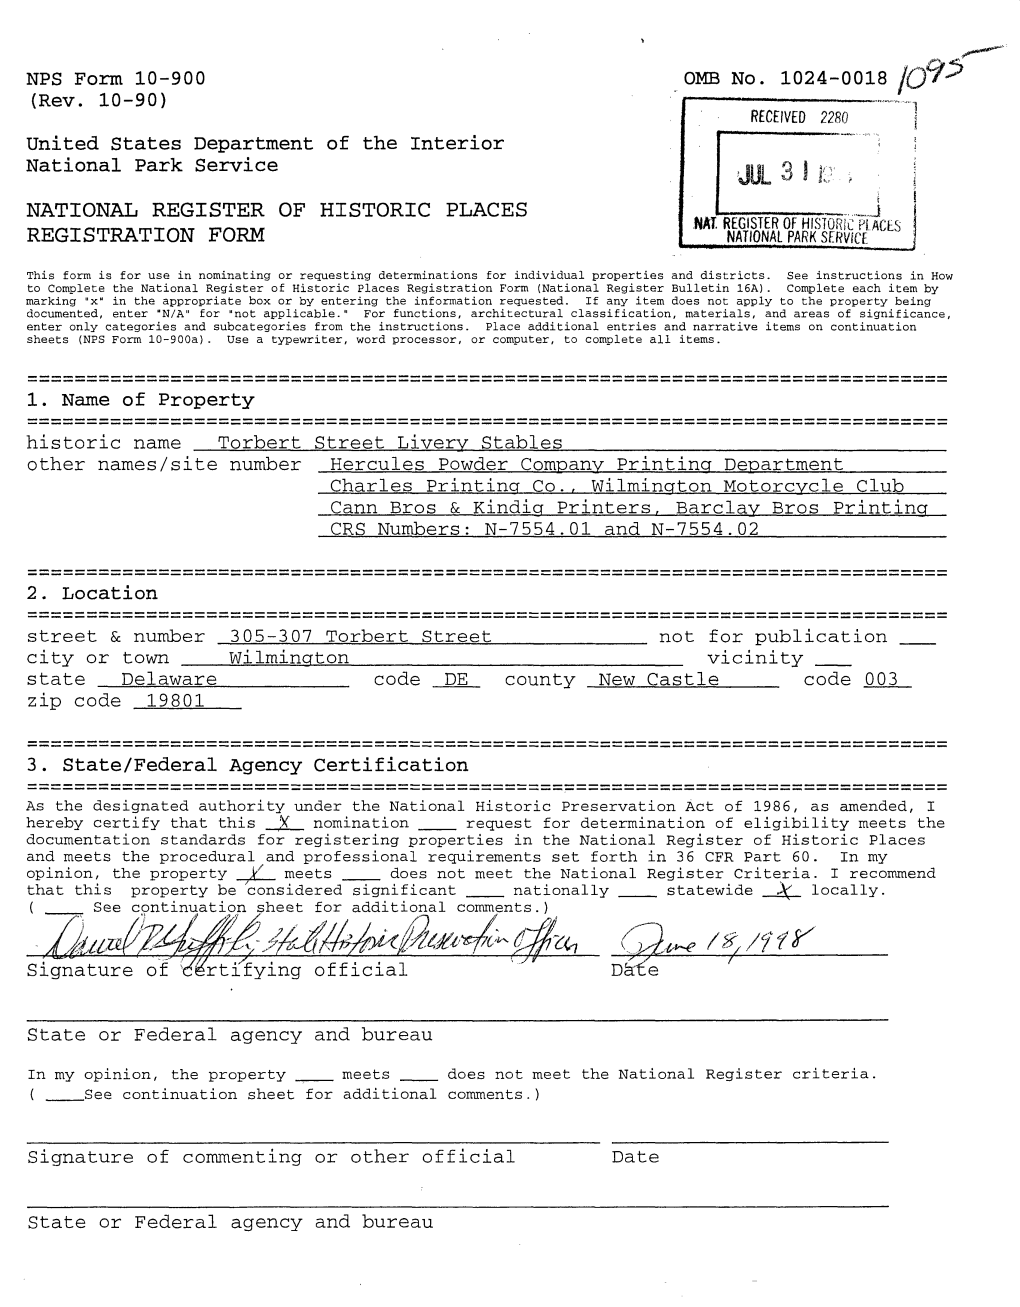 3. State/Federal Agency Certification Signature of Certifying Official